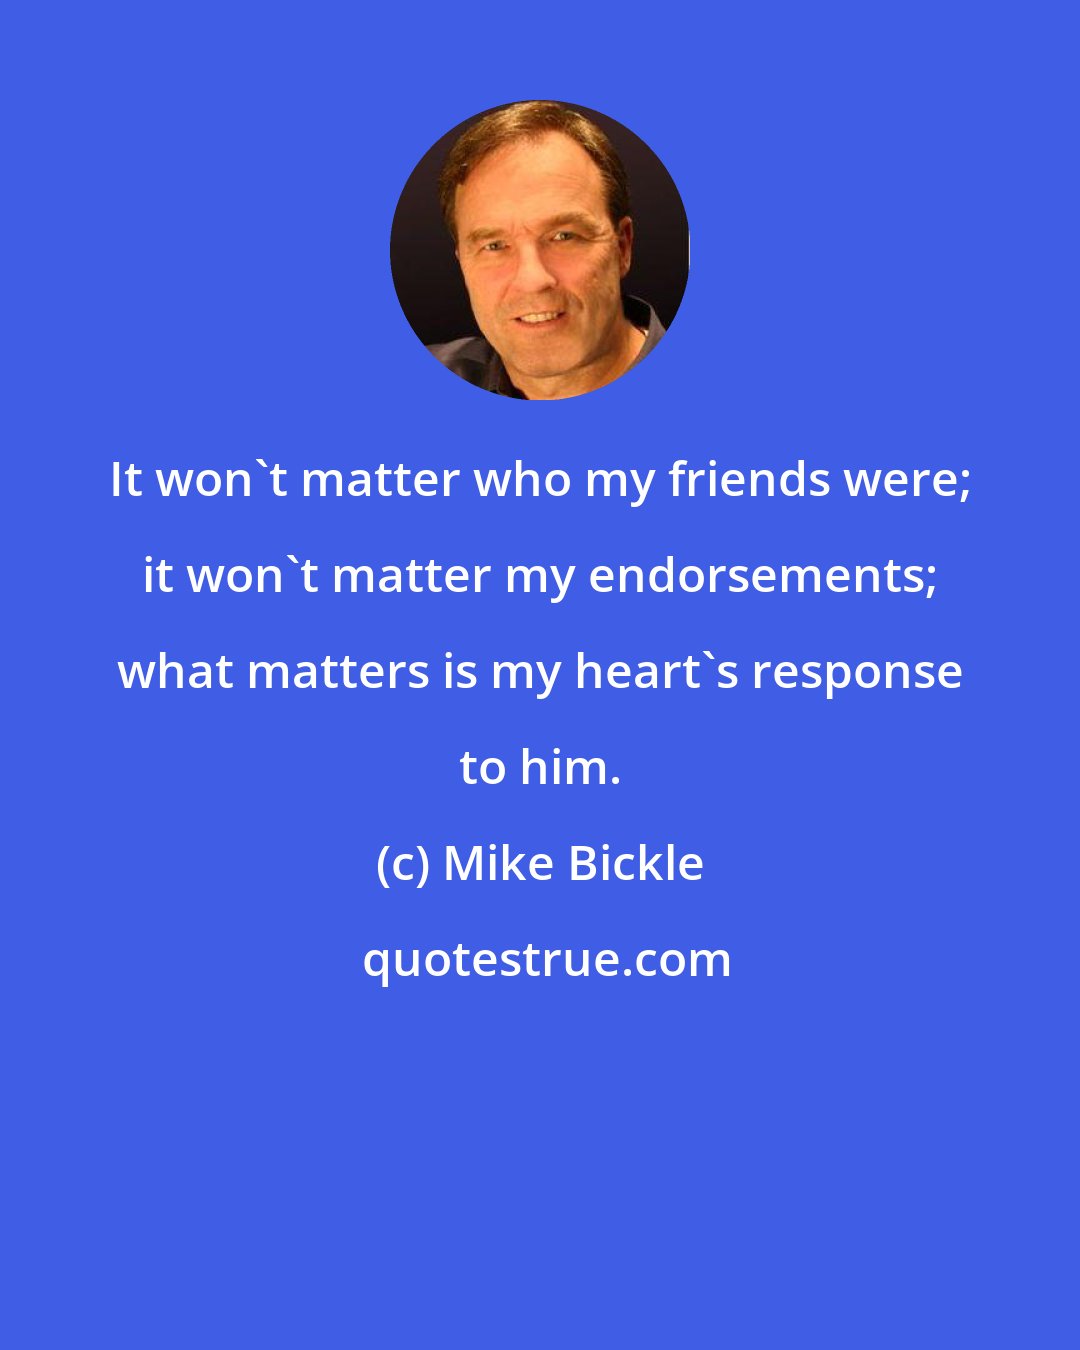 Mike Bickle: It won't matter who my friends were; it won't matter my endorsements; what matters is my heart's response to him.